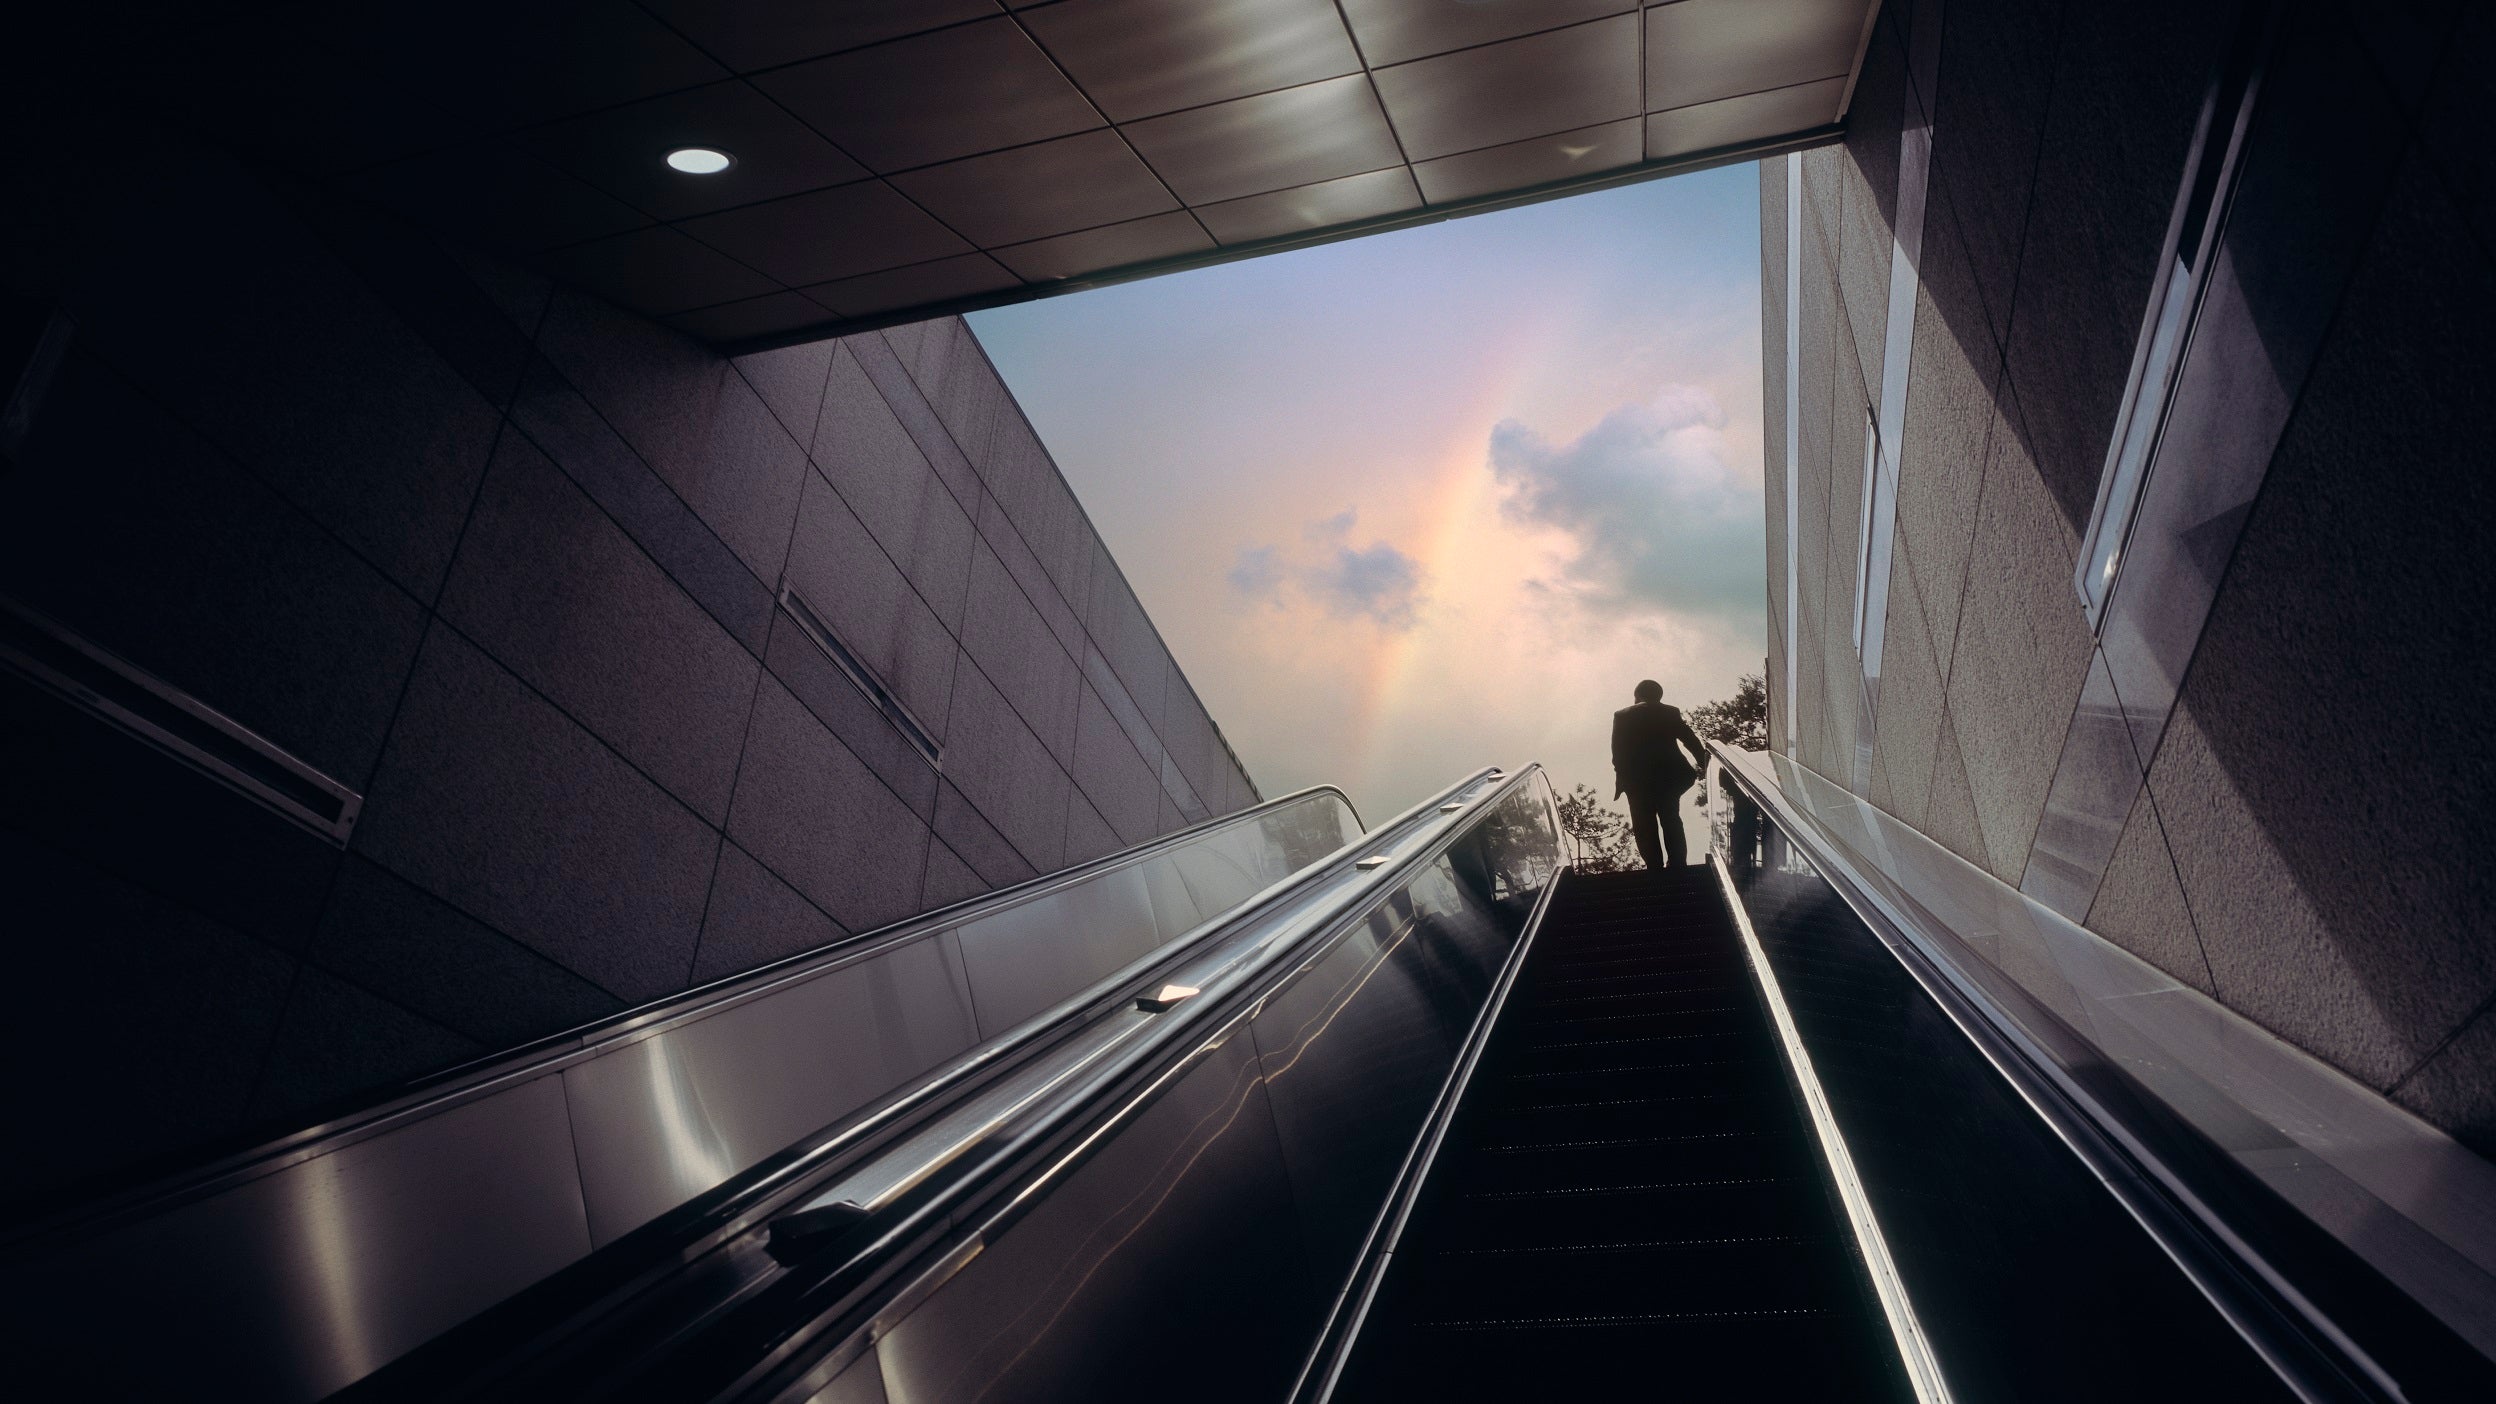 View from behind looking up an escalator as a person emerges from underground with a rainbow viewable in the sky.